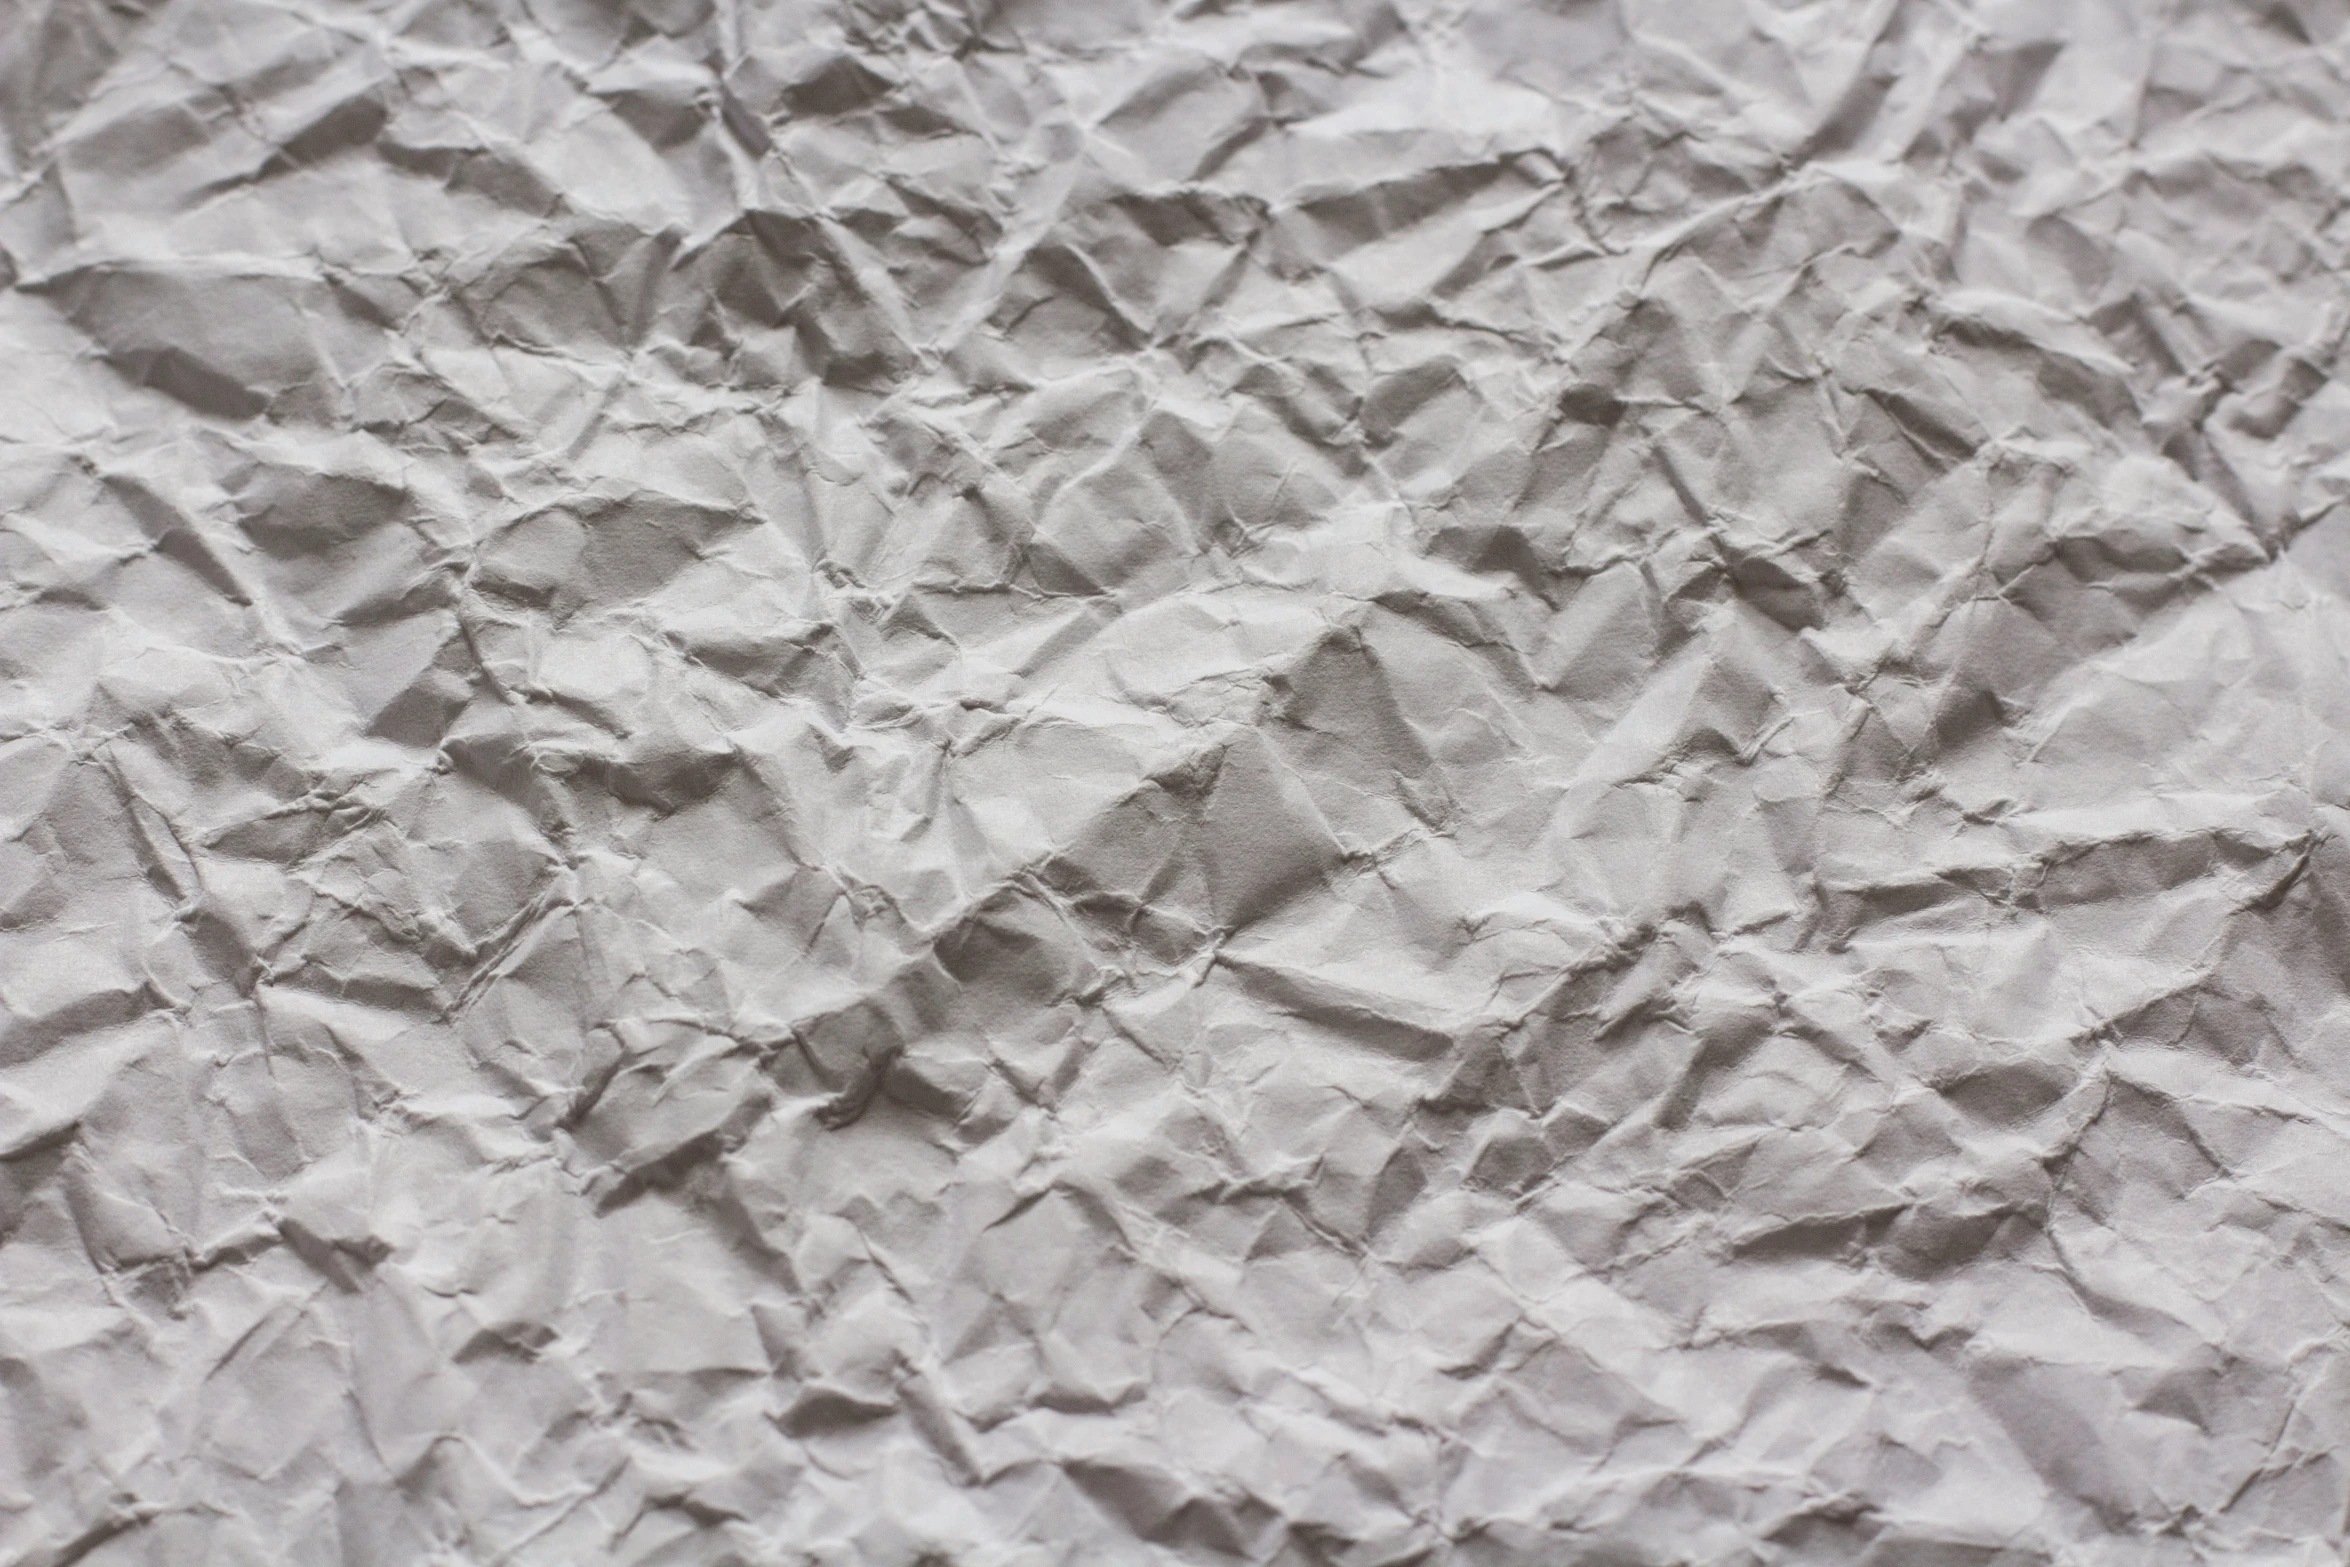 wrinkled paper with white edges, showing some gray paint